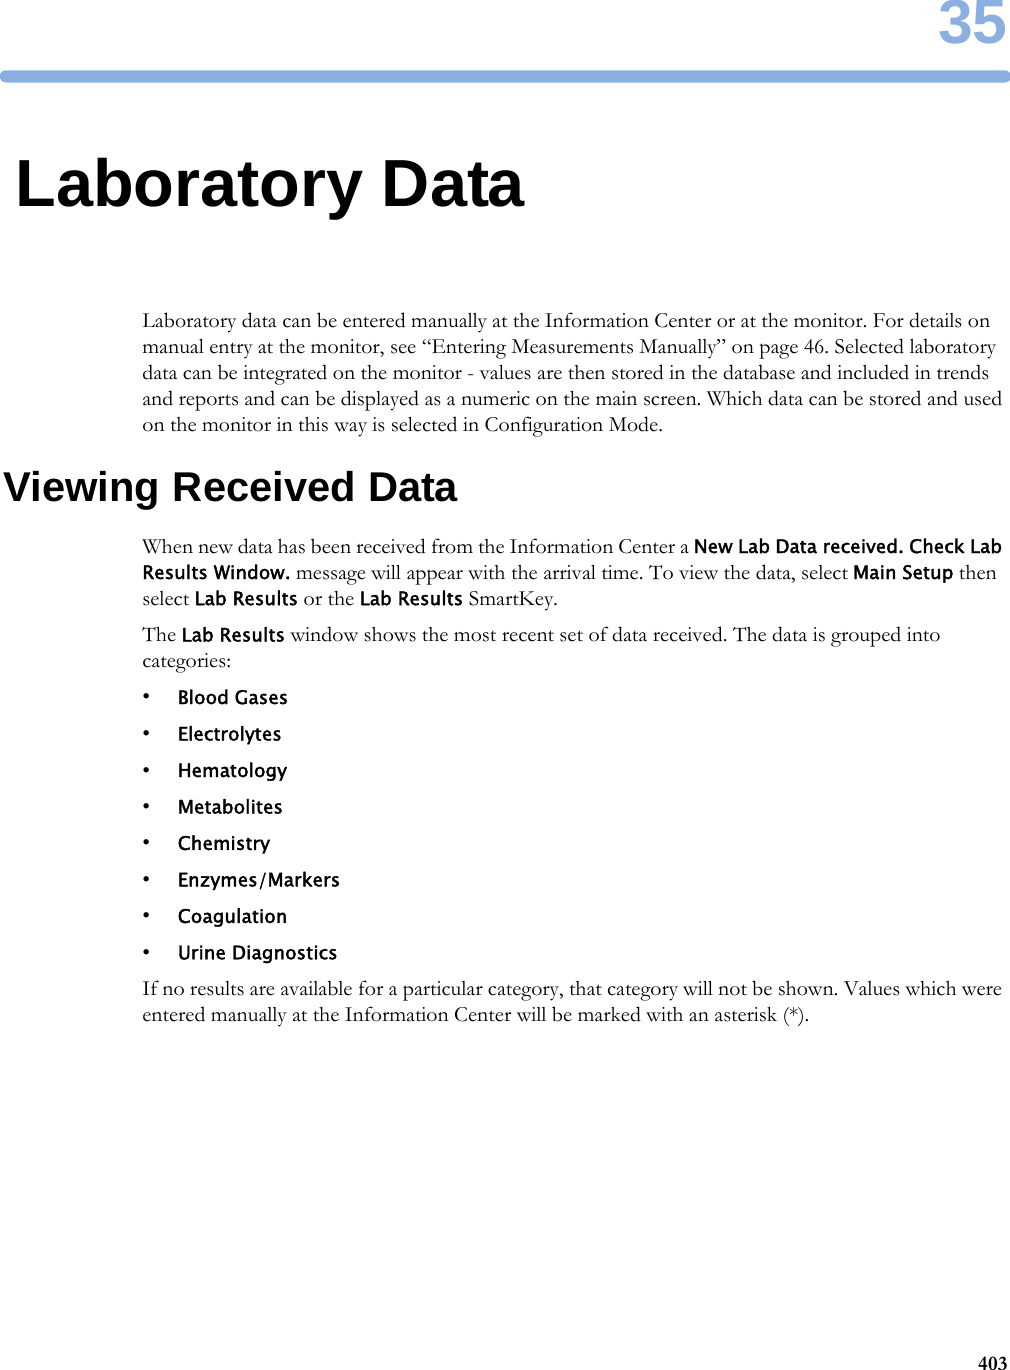 3540335Laboratory DataLaboratory data can be entered manually at the Information Center or at the monitor. For details on manual entry at the monitor, see “Entering Measurements Manually” on page 46. Selected laboratory data can be integrated on the monitor - values are then stored in the database and included in trends and reports and can be displayed as a numeric on the main screen. Which data can be stored and used on the monitor in this way is selected in Configuration Mode.Viewing Received DataWhen new data has been received from the Information Center a New Lab Data received. Check Lab Results Window. message will appear with the arrival time. To view the data, select Main Setup then select Lab Results or the Lab Results SmartKey.The Lab Results window shows the most recent set of data received. The data is grouped into categories:•Blood Gases•Electrolytes•Hematology•Metabolites•Chemistry•Enzymes/Markers•Coagulation•Urine DiagnosticsIf no results are available for a particular category, that category will not be shown. Values which were entered manually at the Information Center will be marked with an asterisk (*).